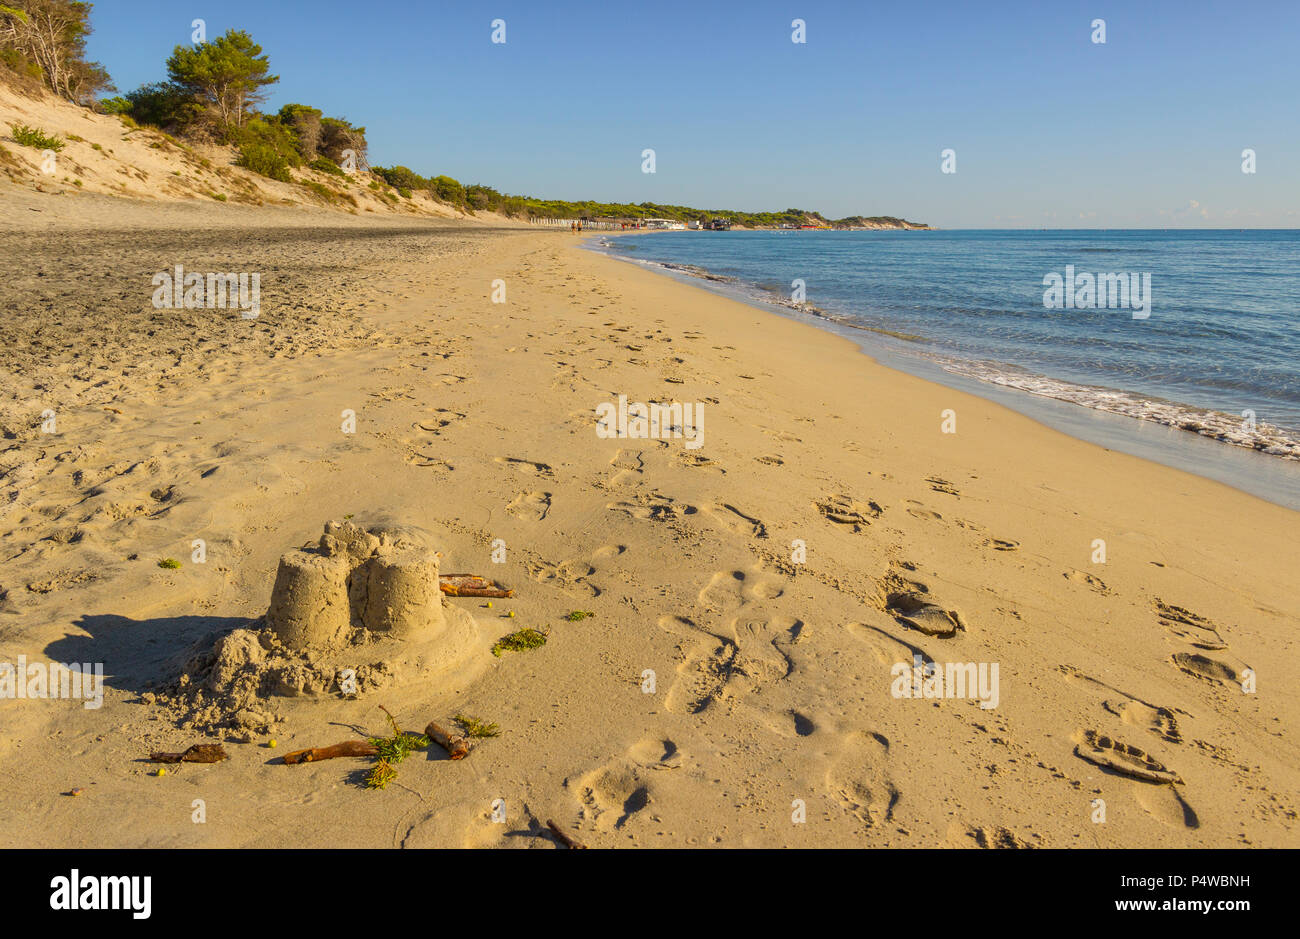 The most beautiful sand beaches of Apulia: Alimini bay,Salento coast. Italy. It is a vast sandy coast protected by pine forests that grow from dunes. Stock Photo